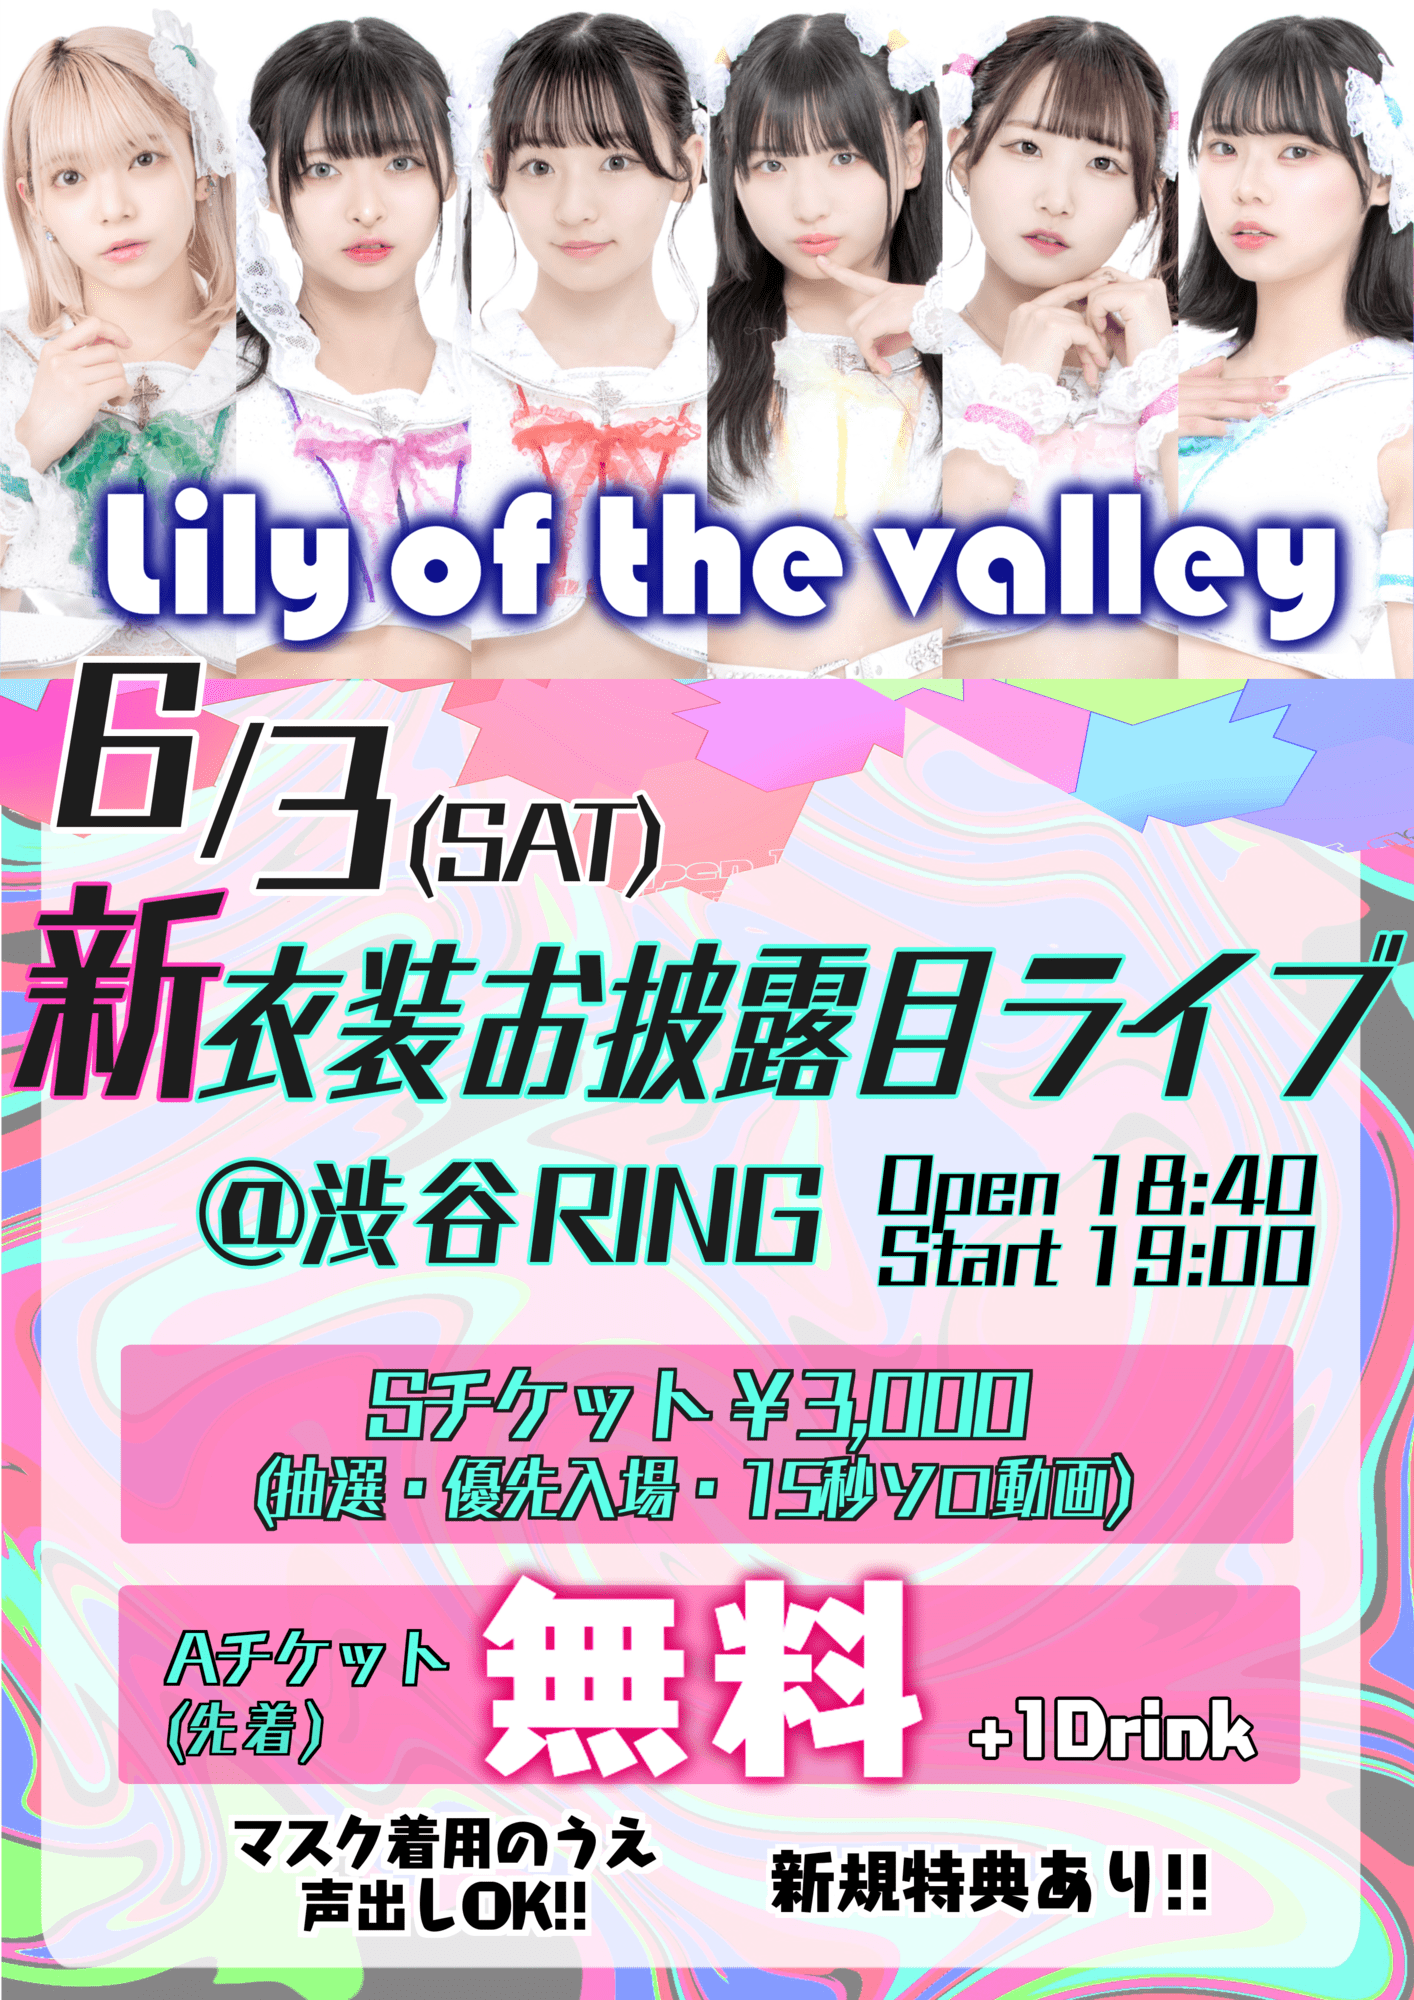 Lily of the valley presents 新衣装お披露目ライブ